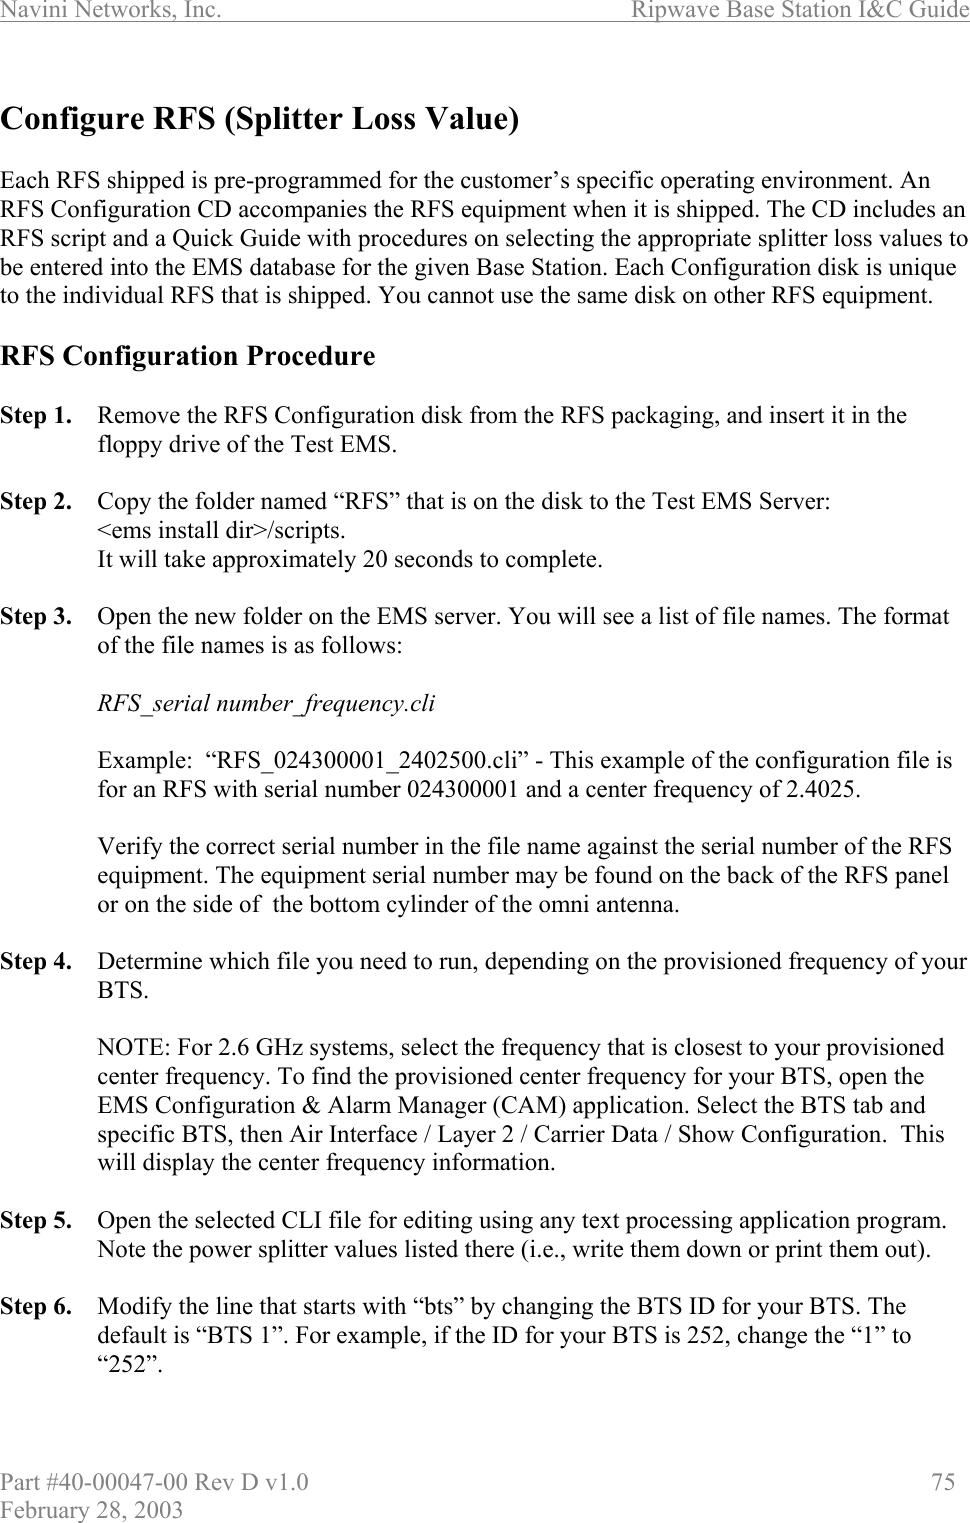 Navini Networks, Inc.                          Ripwave Base Station I&amp;C Guide Part #40-00047-00 Rev D v1.0                     75 February 28, 2003  Configure RFS (Splitter Loss Value)  Each RFS shipped is pre-programmed for the customer’s specific operating environment. An RFS Configuration CD accompanies the RFS equipment when it is shipped. The CD includes an RFS script and a Quick Guide with procedures on selecting the appropriate splitter loss values to be entered into the EMS database for the given Base Station. Each Configuration disk is unique to the individual RFS that is shipped. You cannot use the same disk on other RFS equipment.  RFS Configuration Procedure  Step 1.  Remove the RFS Configuration disk from the RFS packaging, and insert it in the floppy drive of the Test EMS.  Step 2.  Copy the folder named “RFS” that is on the disk to the Test EMS Server:  &lt;ems install dir&gt;/scripts.  It will take approximately 20 seconds to complete.  Step 3.  Open the new folder on the EMS server. You will see a list of file names. The format of the file names is as follows:  RFS_serial number_frequency.cli  Example:  “RFS_024300001_2402500.cli” - This example of the configuration file is for an RFS with serial number 024300001 and a center frequency of 2.4025.  Verify the correct serial number in the file name against the serial number of the RFS equipment. The equipment serial number may be found on the back of the RFS panel or on the side of  the bottom cylinder of the omni antenna.  Step 4.  Determine which file you need to run, depending on the provisioned frequency of your BTS.   NOTE: For 2.6 GHz systems, select the frequency that is closest to your provisioned center frequency. To find the provisioned center frequency for your BTS, open the EMS Configuration &amp; Alarm Manager (CAM) application. Select the BTS tab and specific BTS, then Air Interface / Layer 2 / Carrier Data / Show Configuration.  This will display the center frequency information.  Step 5.  Open the selected CLI file for editing using any text processing application program. Note the power splitter values listed there (i.e., write them down or print them out).  Step 6.  Modify the line that starts with “bts” by changing the BTS ID for your BTS. The default is “BTS 1”. For example, if the ID for your BTS is 252, change the “1” to “252”.  